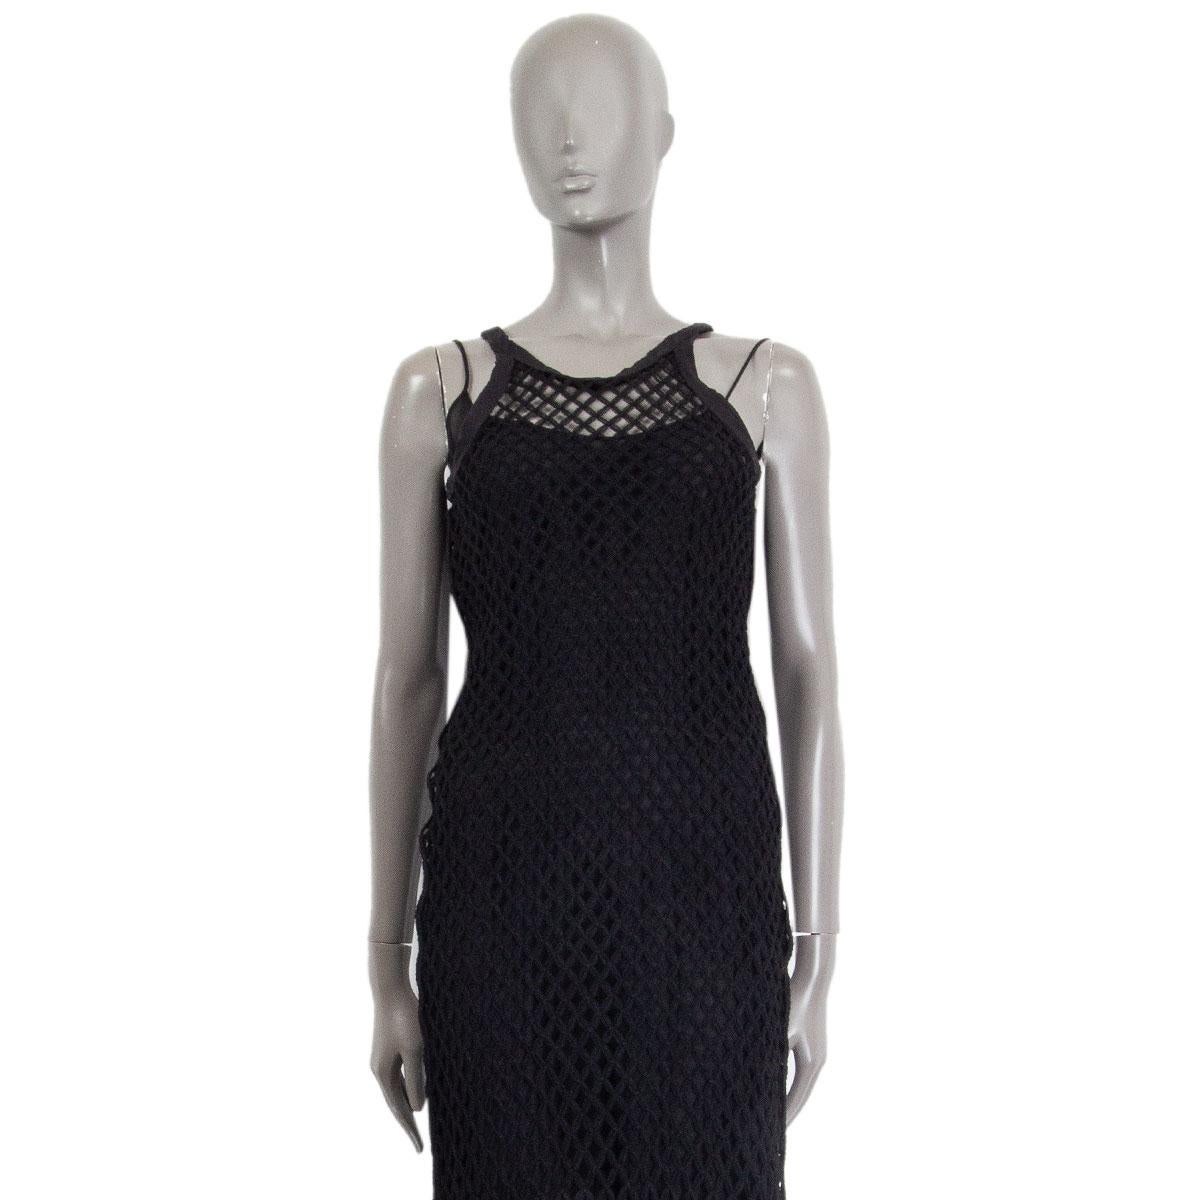 100% authentic Christian Dior two layers long net dress in black tulle and silk (missing content tag). Has been worn and is in excellent condition. 

Tag Size	XS
Bust	66cm (25.7in) to 80cm (31.2in)
Waist	70cm (27.3in) to 80cm (31.2in)
Hips	76cm